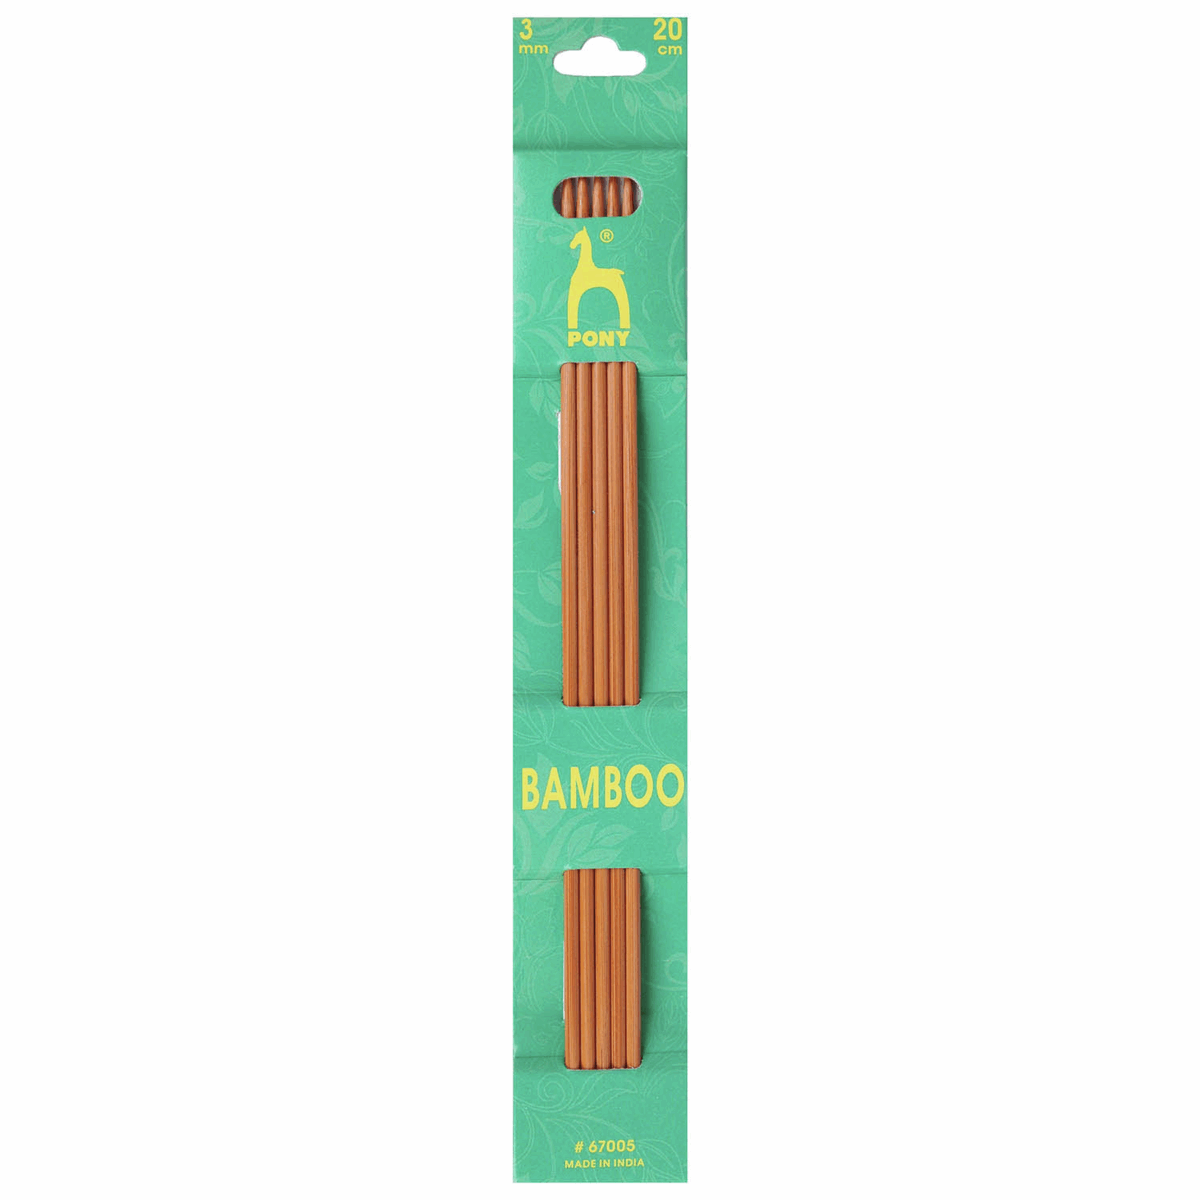 PONY Double-Ended Bamboo Knitting Pins - 20cm x 3mm (Set of 5)